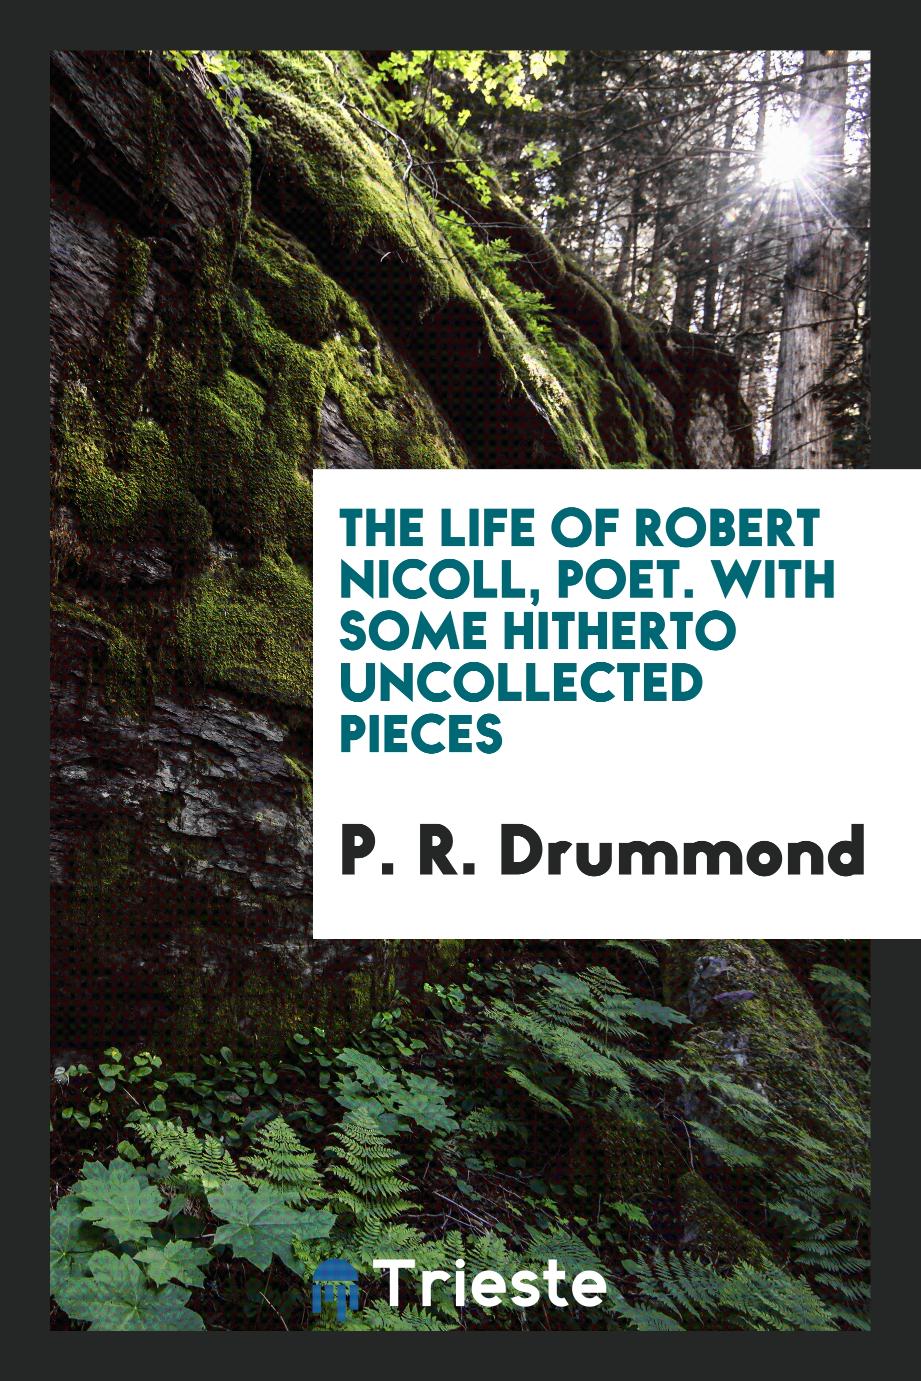 The Life of Robert Nicoll, Poet. With Some Hitherto Uncollected Pieces